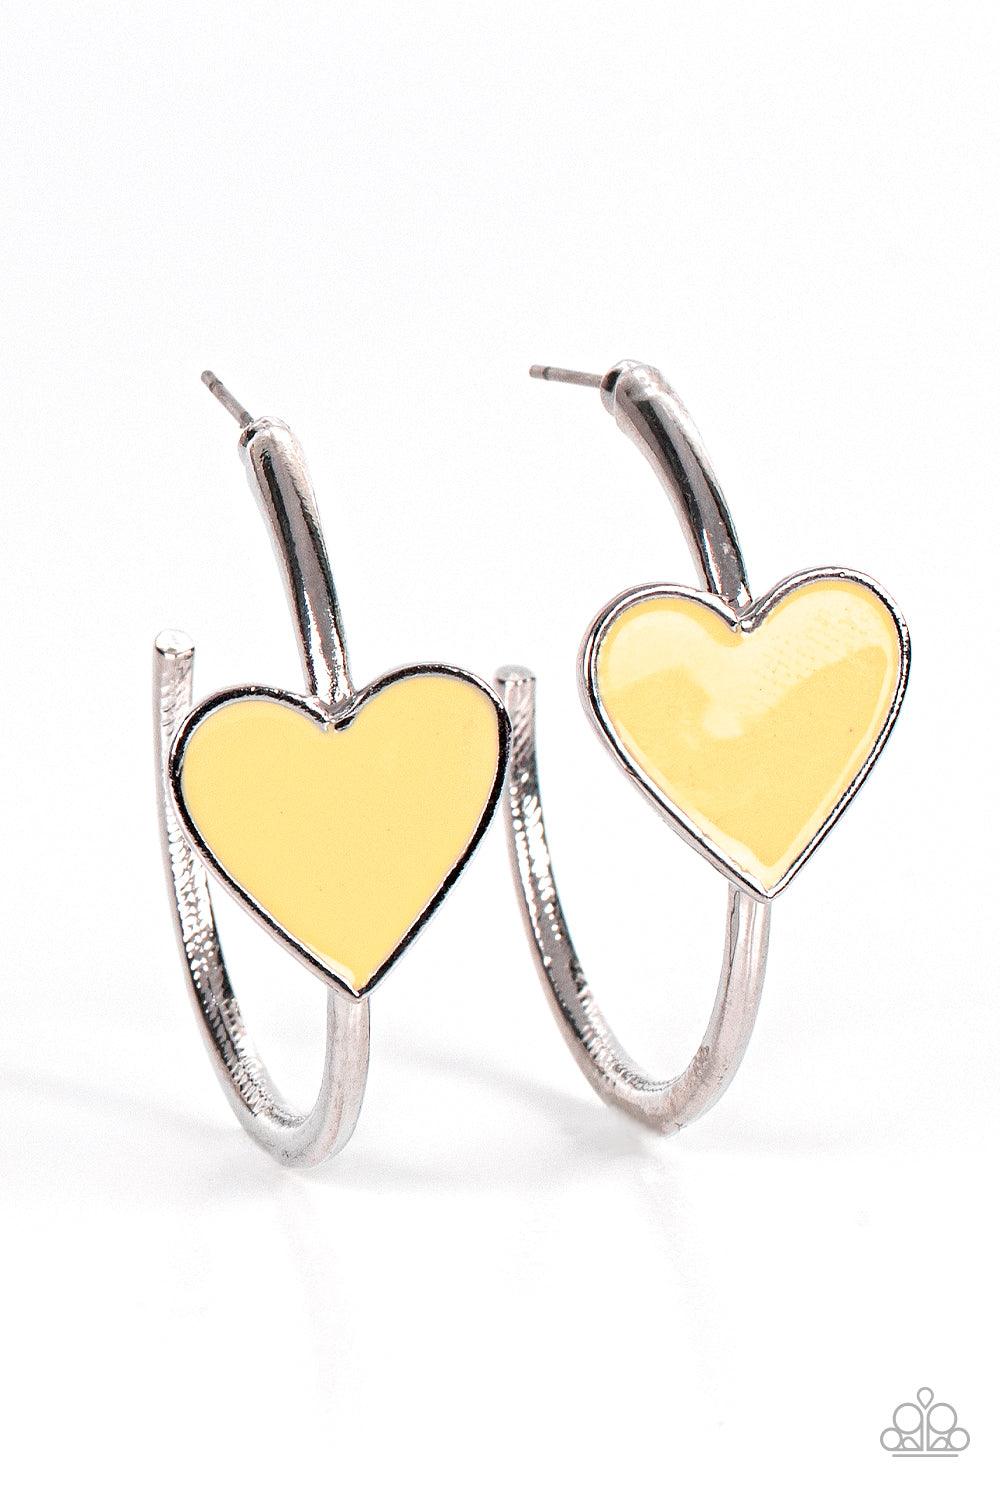 Paparazzi Accessories Kiss Up - Yellow A charming Illuminating heart adorns the front of a classic silver hoop resulting in a whimsical fashion. Earring attaches to a standard post fitting. Hoop measures approximately 1 1/4" in diameter. Sold as one pair